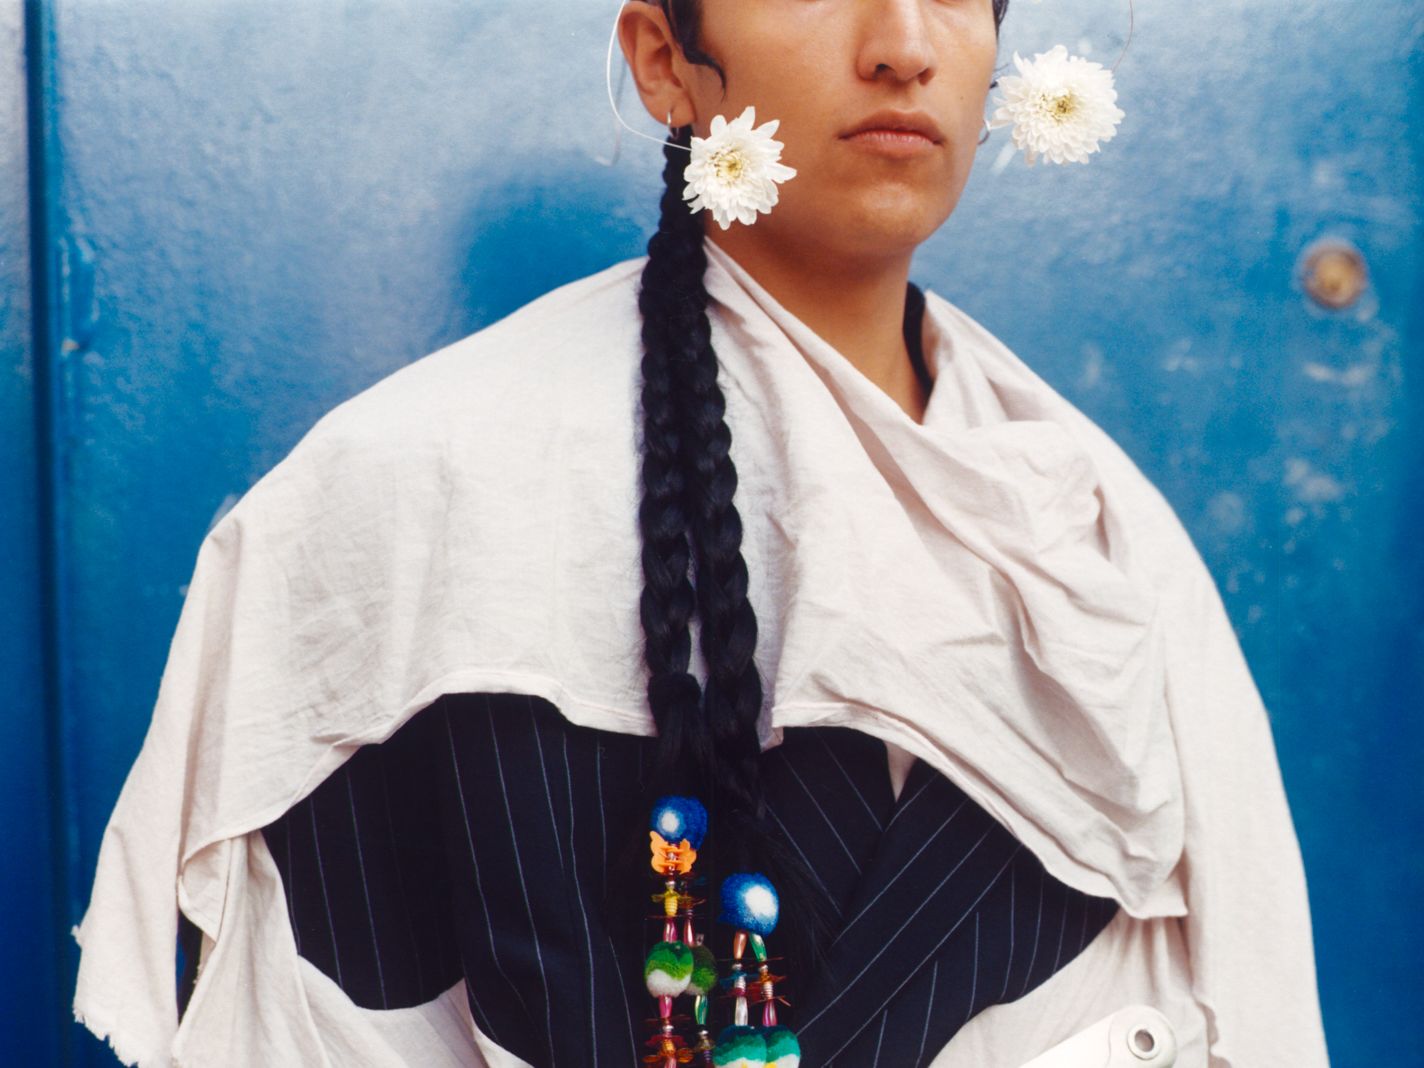 Photograph of LGBTQ+ person wearing flowers in their ears and and a robe held together with a giant clip against a blue wall. 